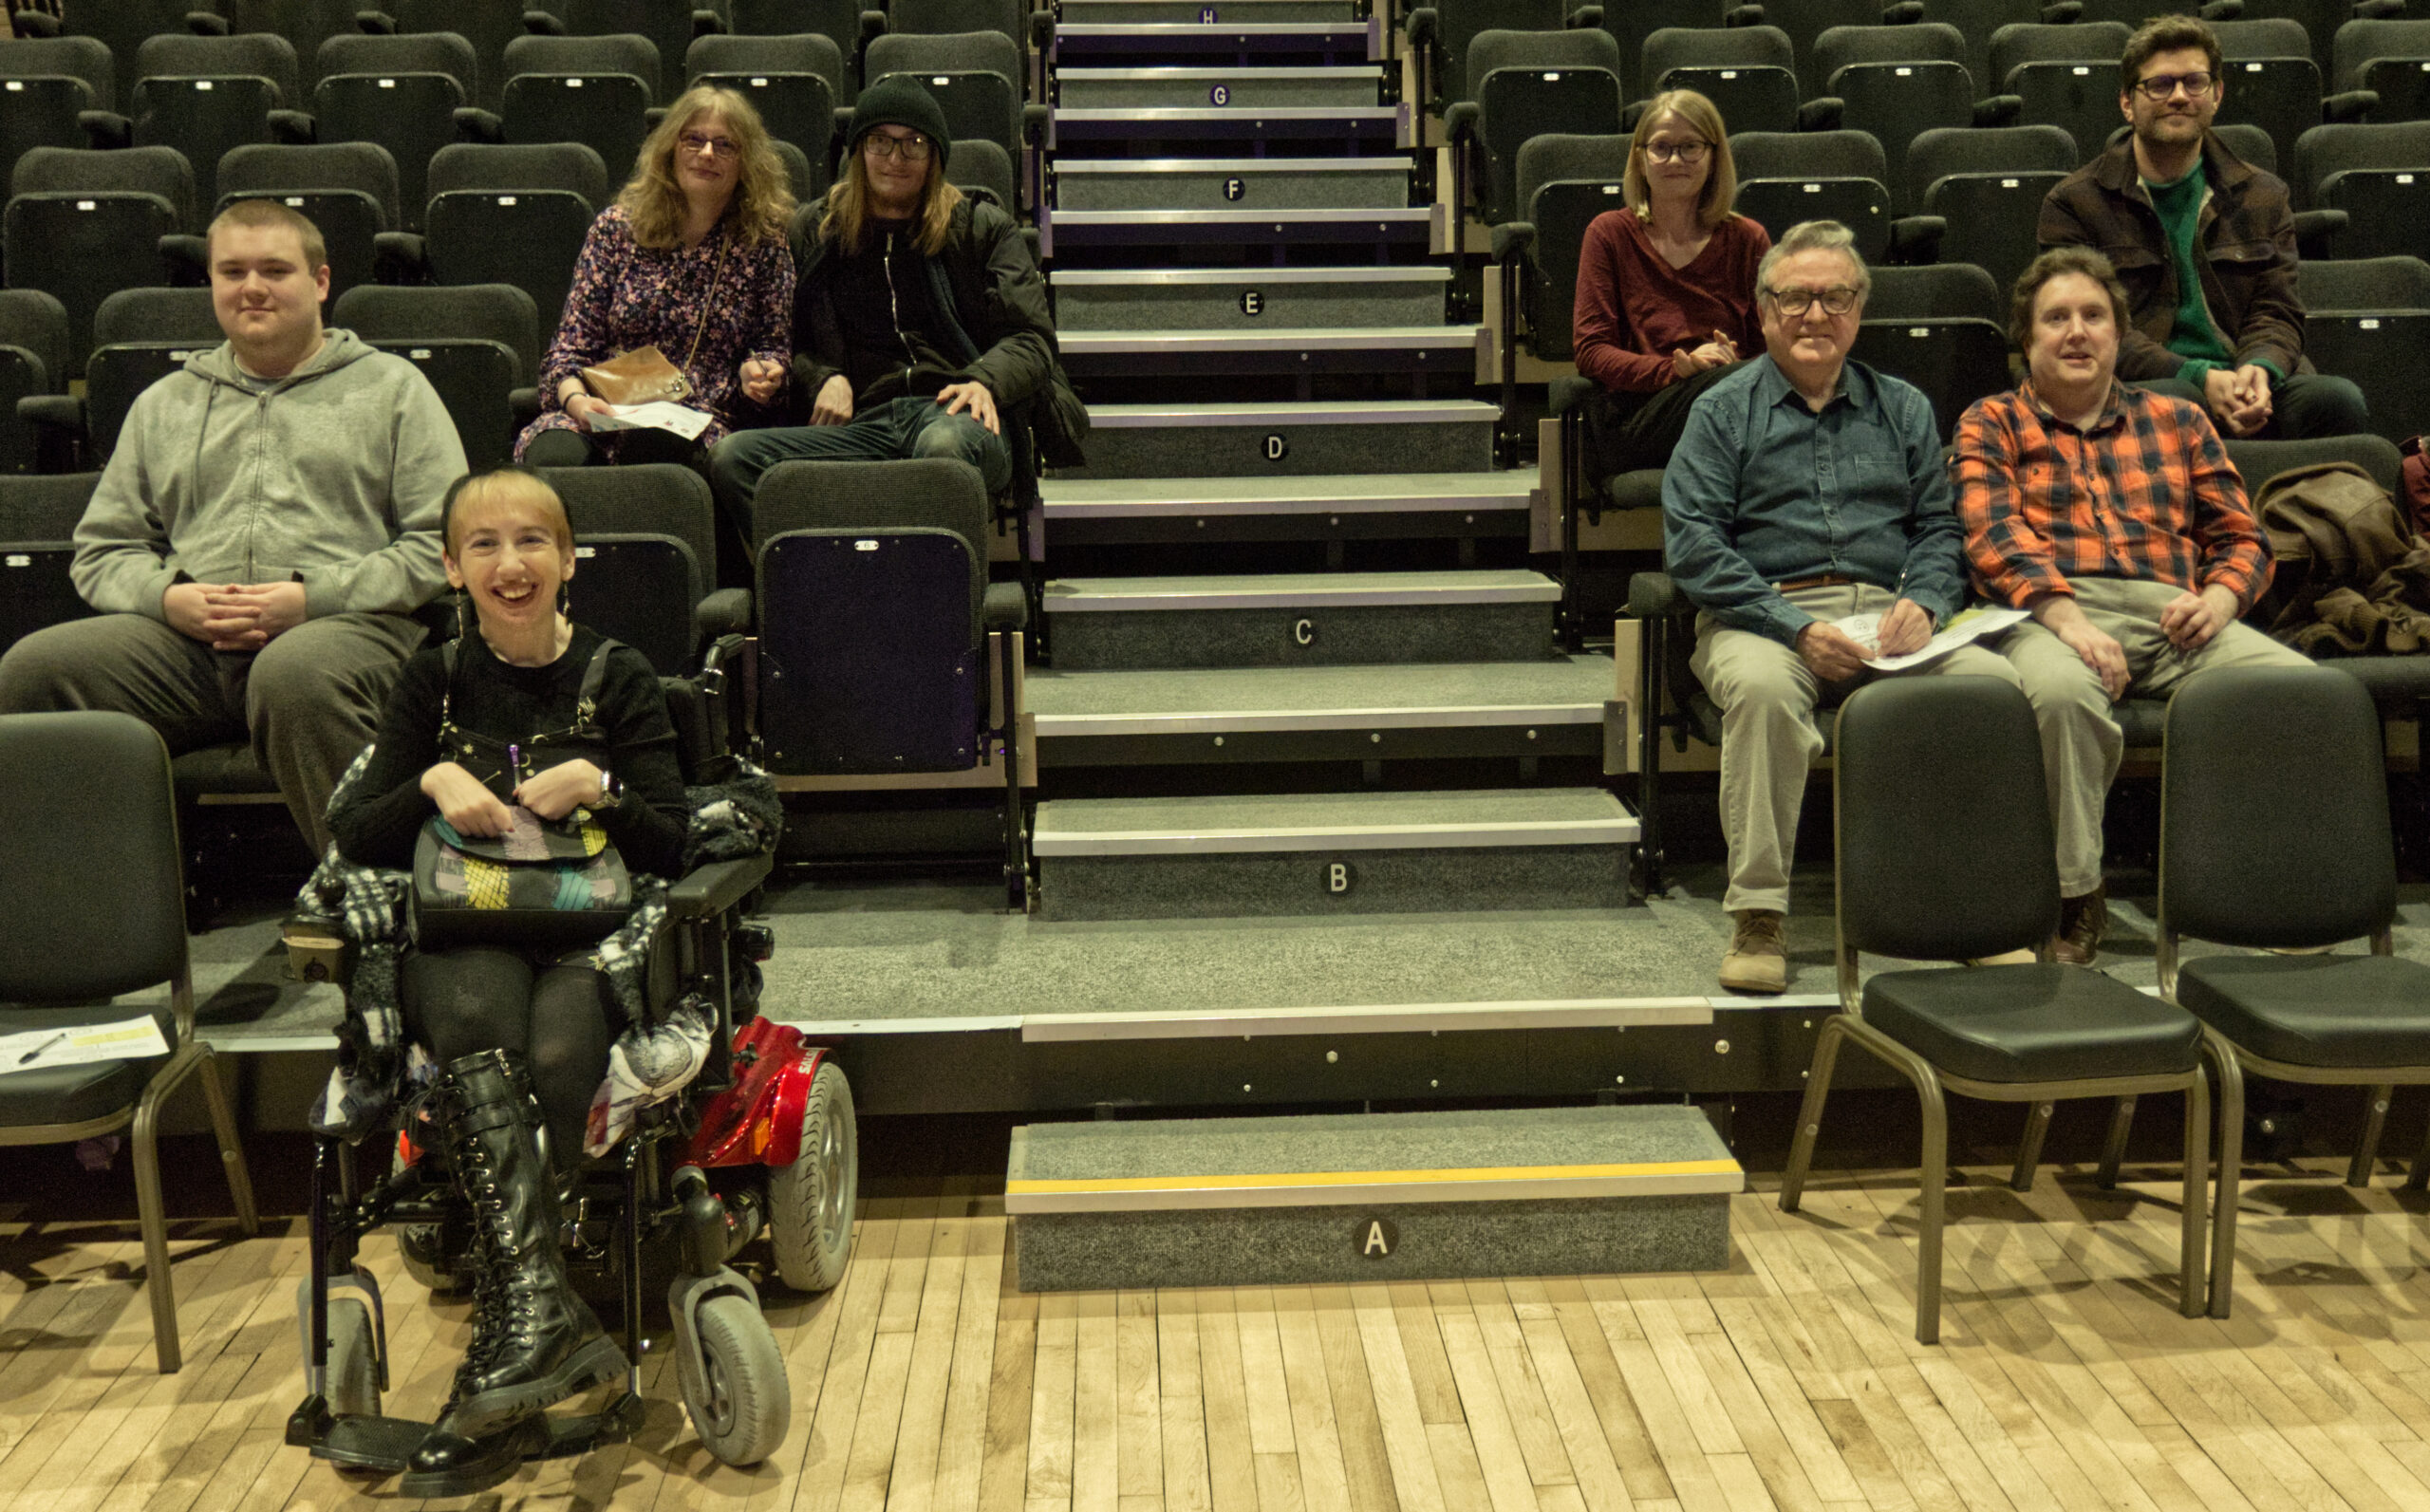 Some of the audience sat ready for a screening to begin at Gosforth Civic Theatre during Daydream Cinema Day